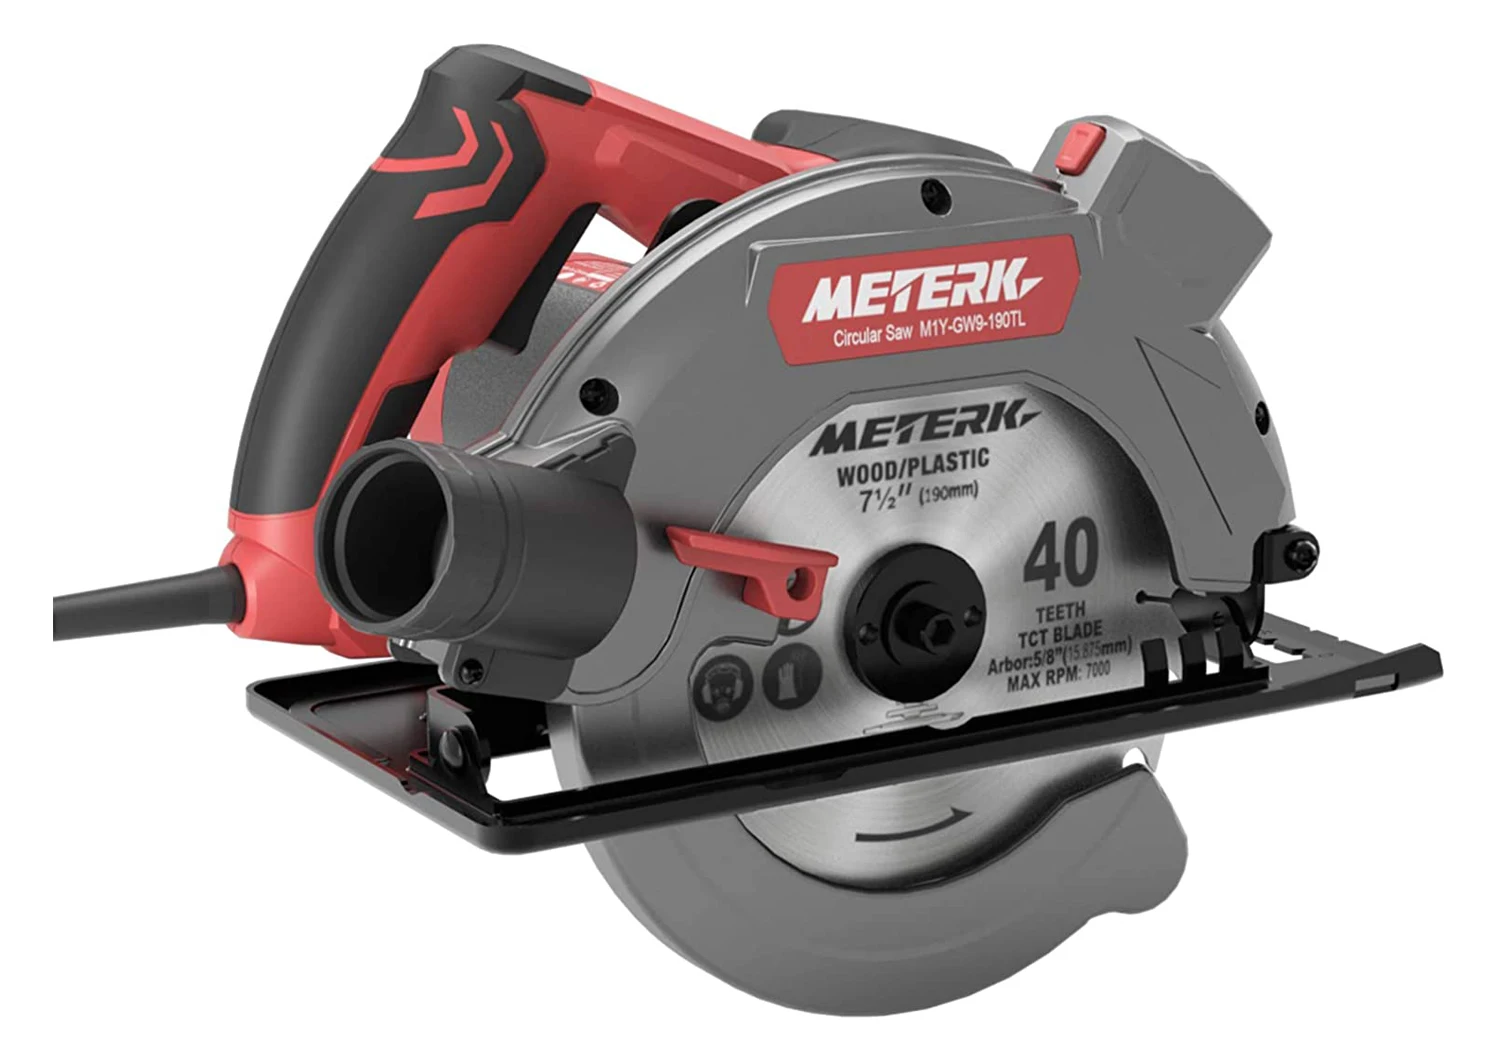 METERK 1500W Electric Circular Saw 5000RPM 190mm Saw Aluminum Body Portable Cutter Carpentry Cutting Tools Woodworking Table Saw